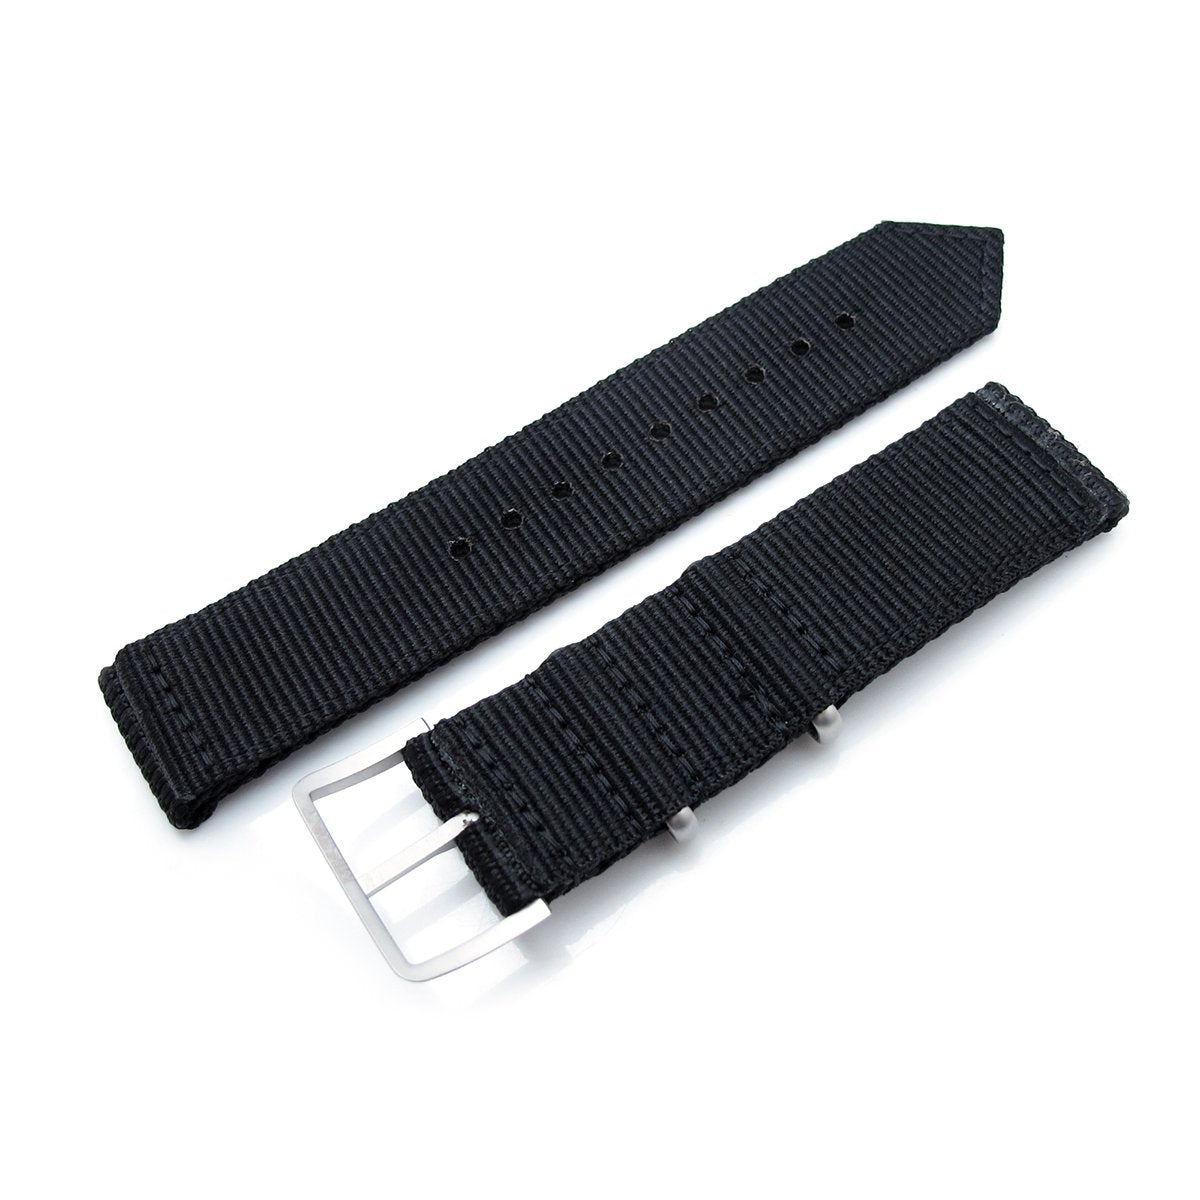 MiLTAT 20mm 22mm Two Piece WW2 G10 Black 3D Nylon Brushed Buckle Strapcode Watch Bands